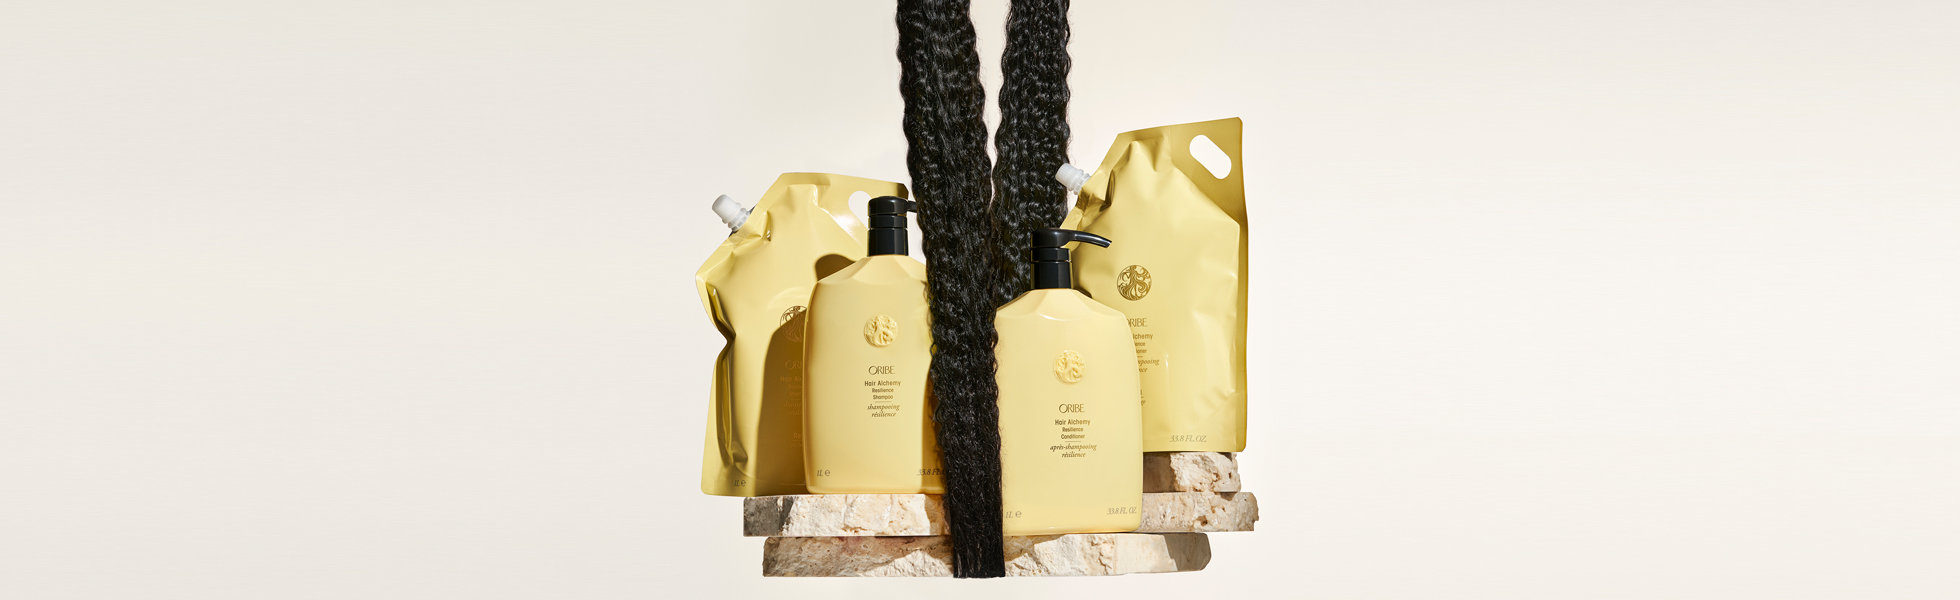 Shop the Liter and Refillable Sizes of the Oribe Hair Alchemy Shampoo and Conditioners